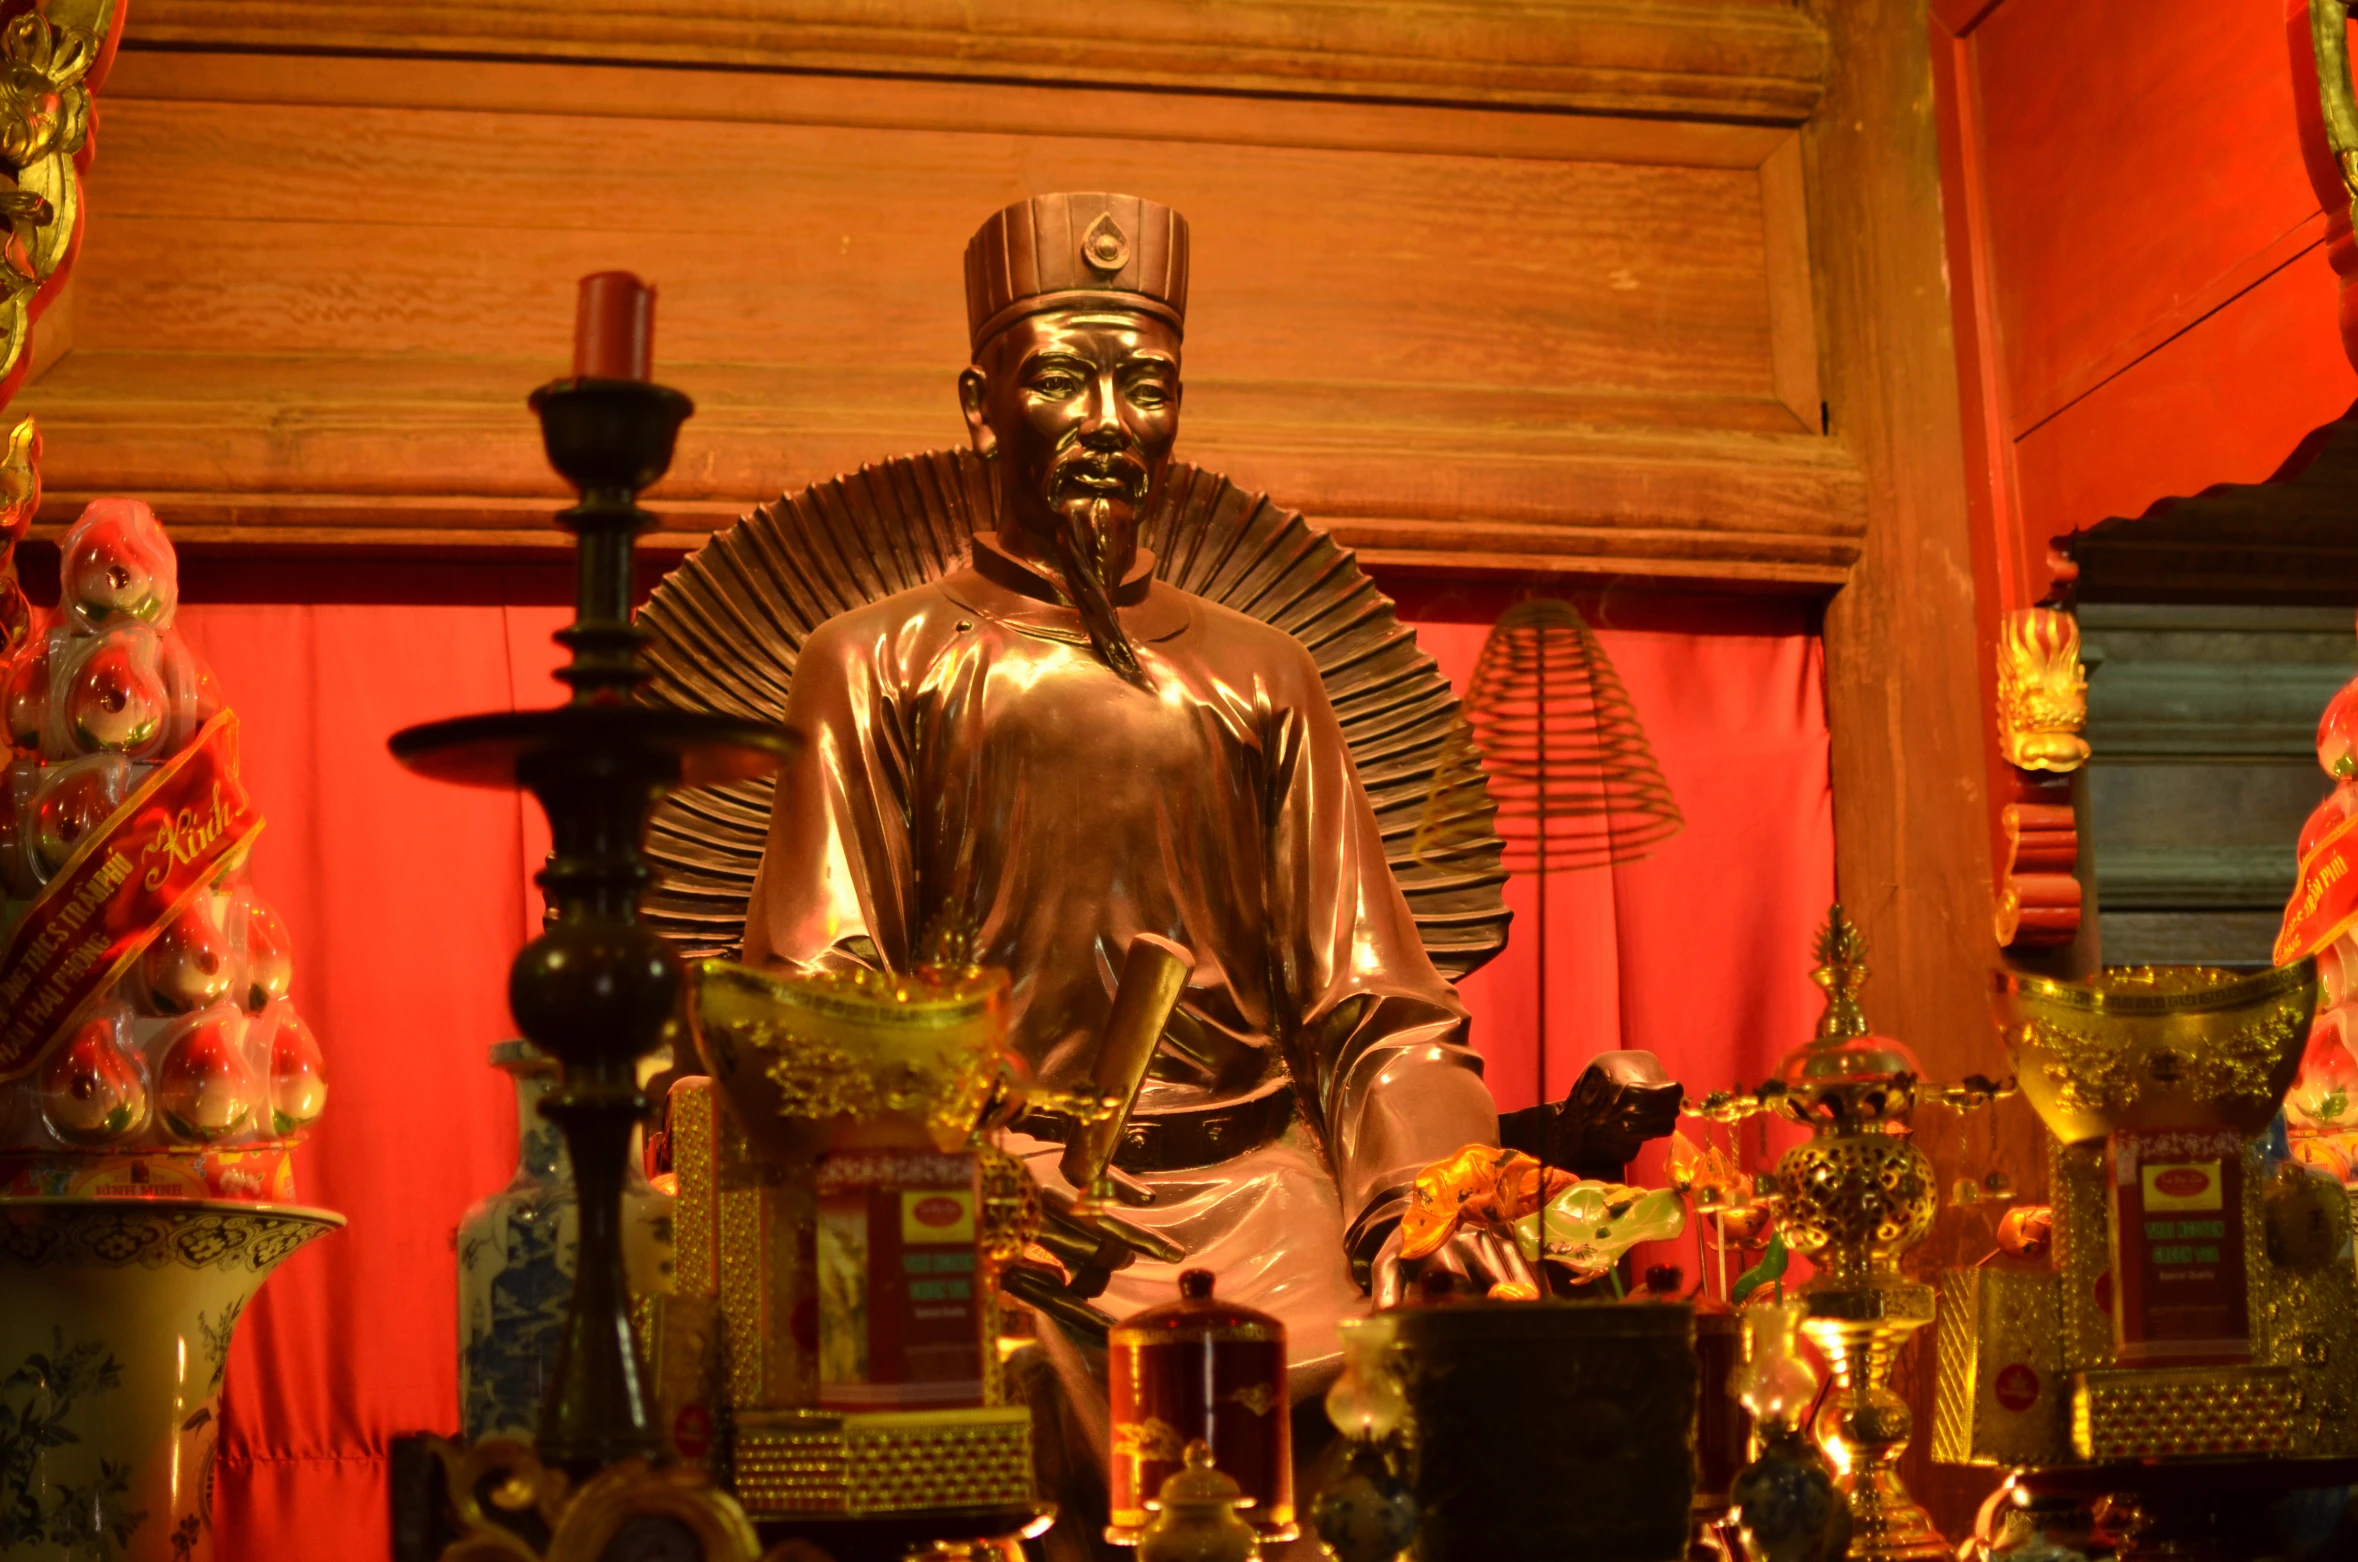 there is a gold statue sitting in front of a table